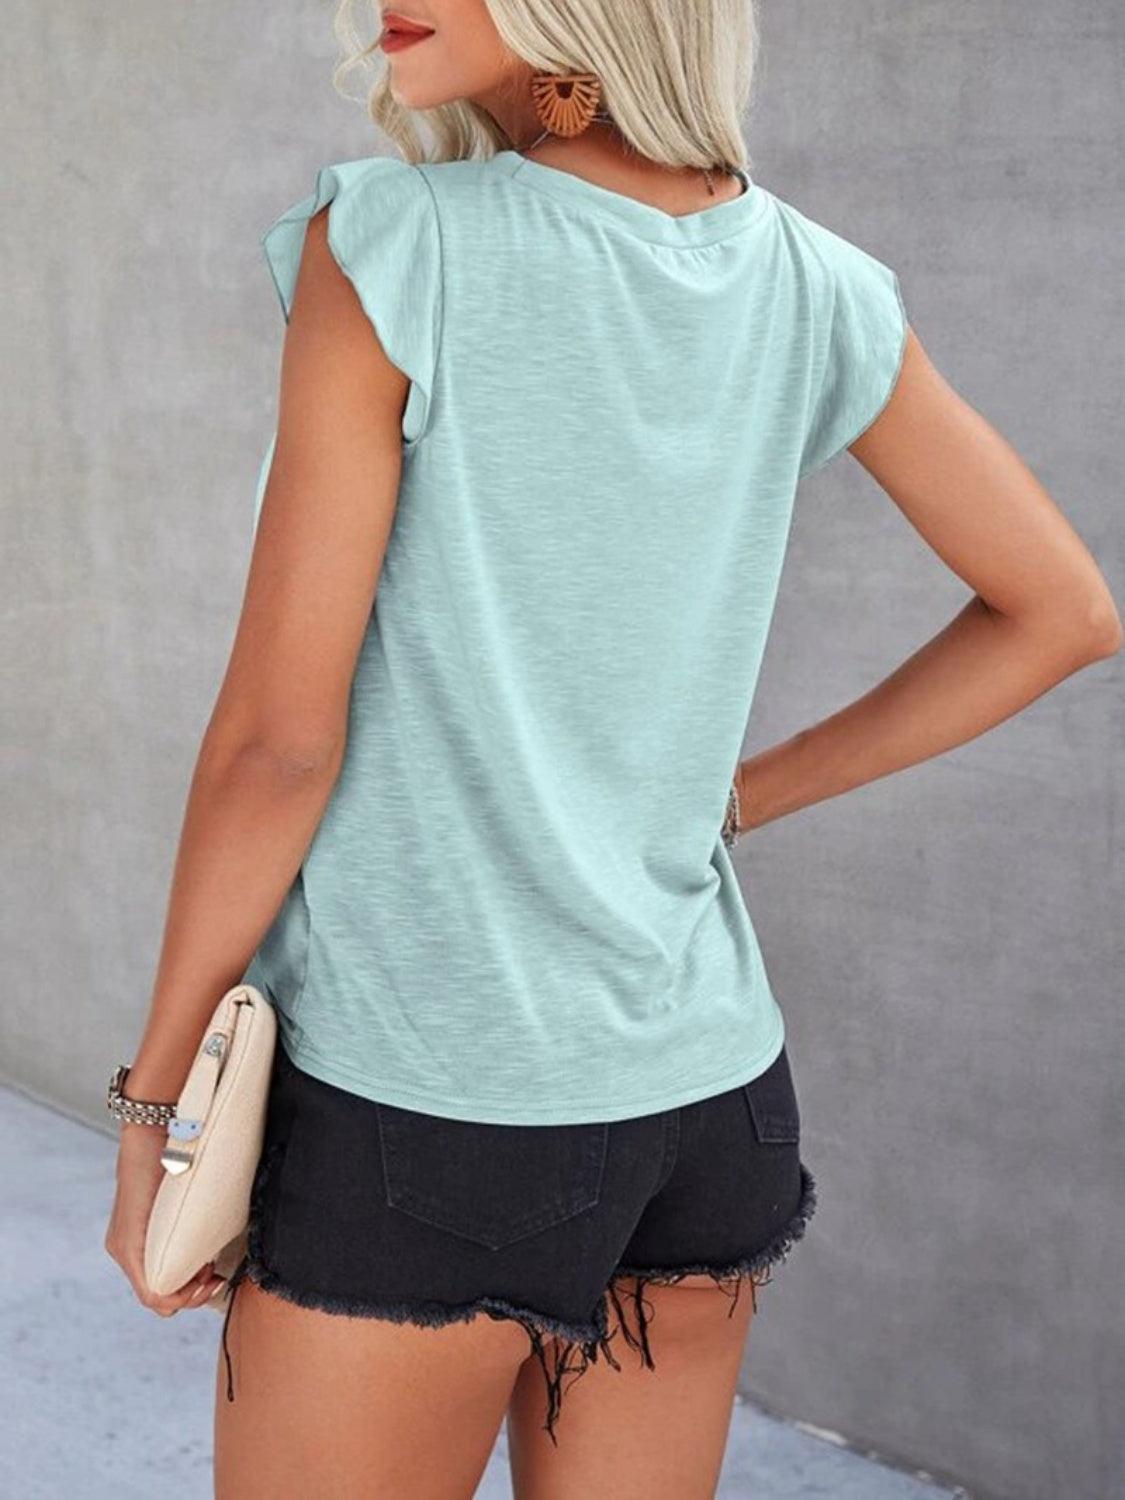 Ruffled Cap Sleeve Top in 6 Colors - Olive Ave